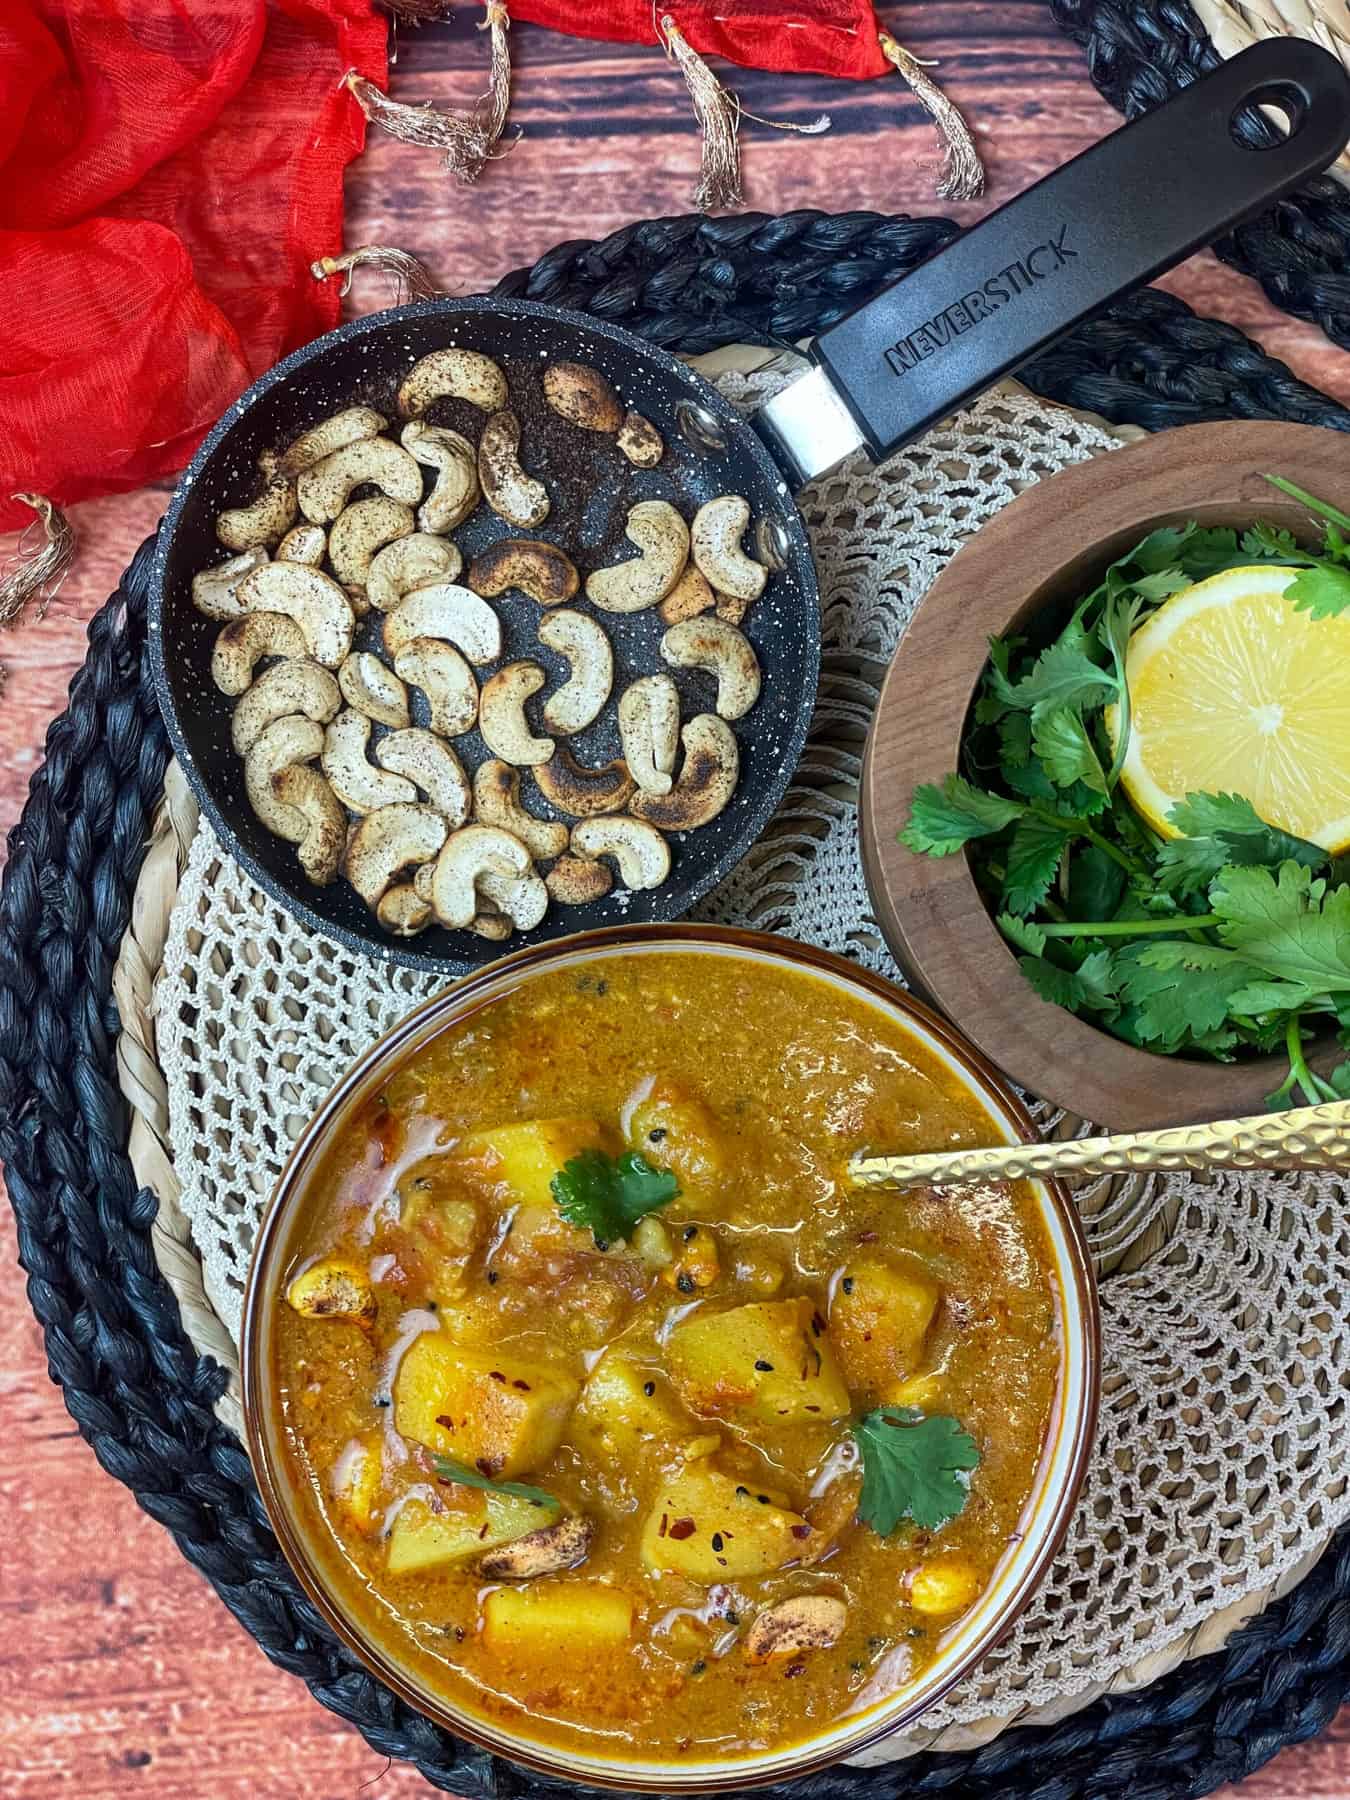 Bombay potato curry soup served with small pan of toasted cashew nuts and wooden mortar bowl with fresh cilantro and slice of lemon in bowl, mat background with orange scarf to side.